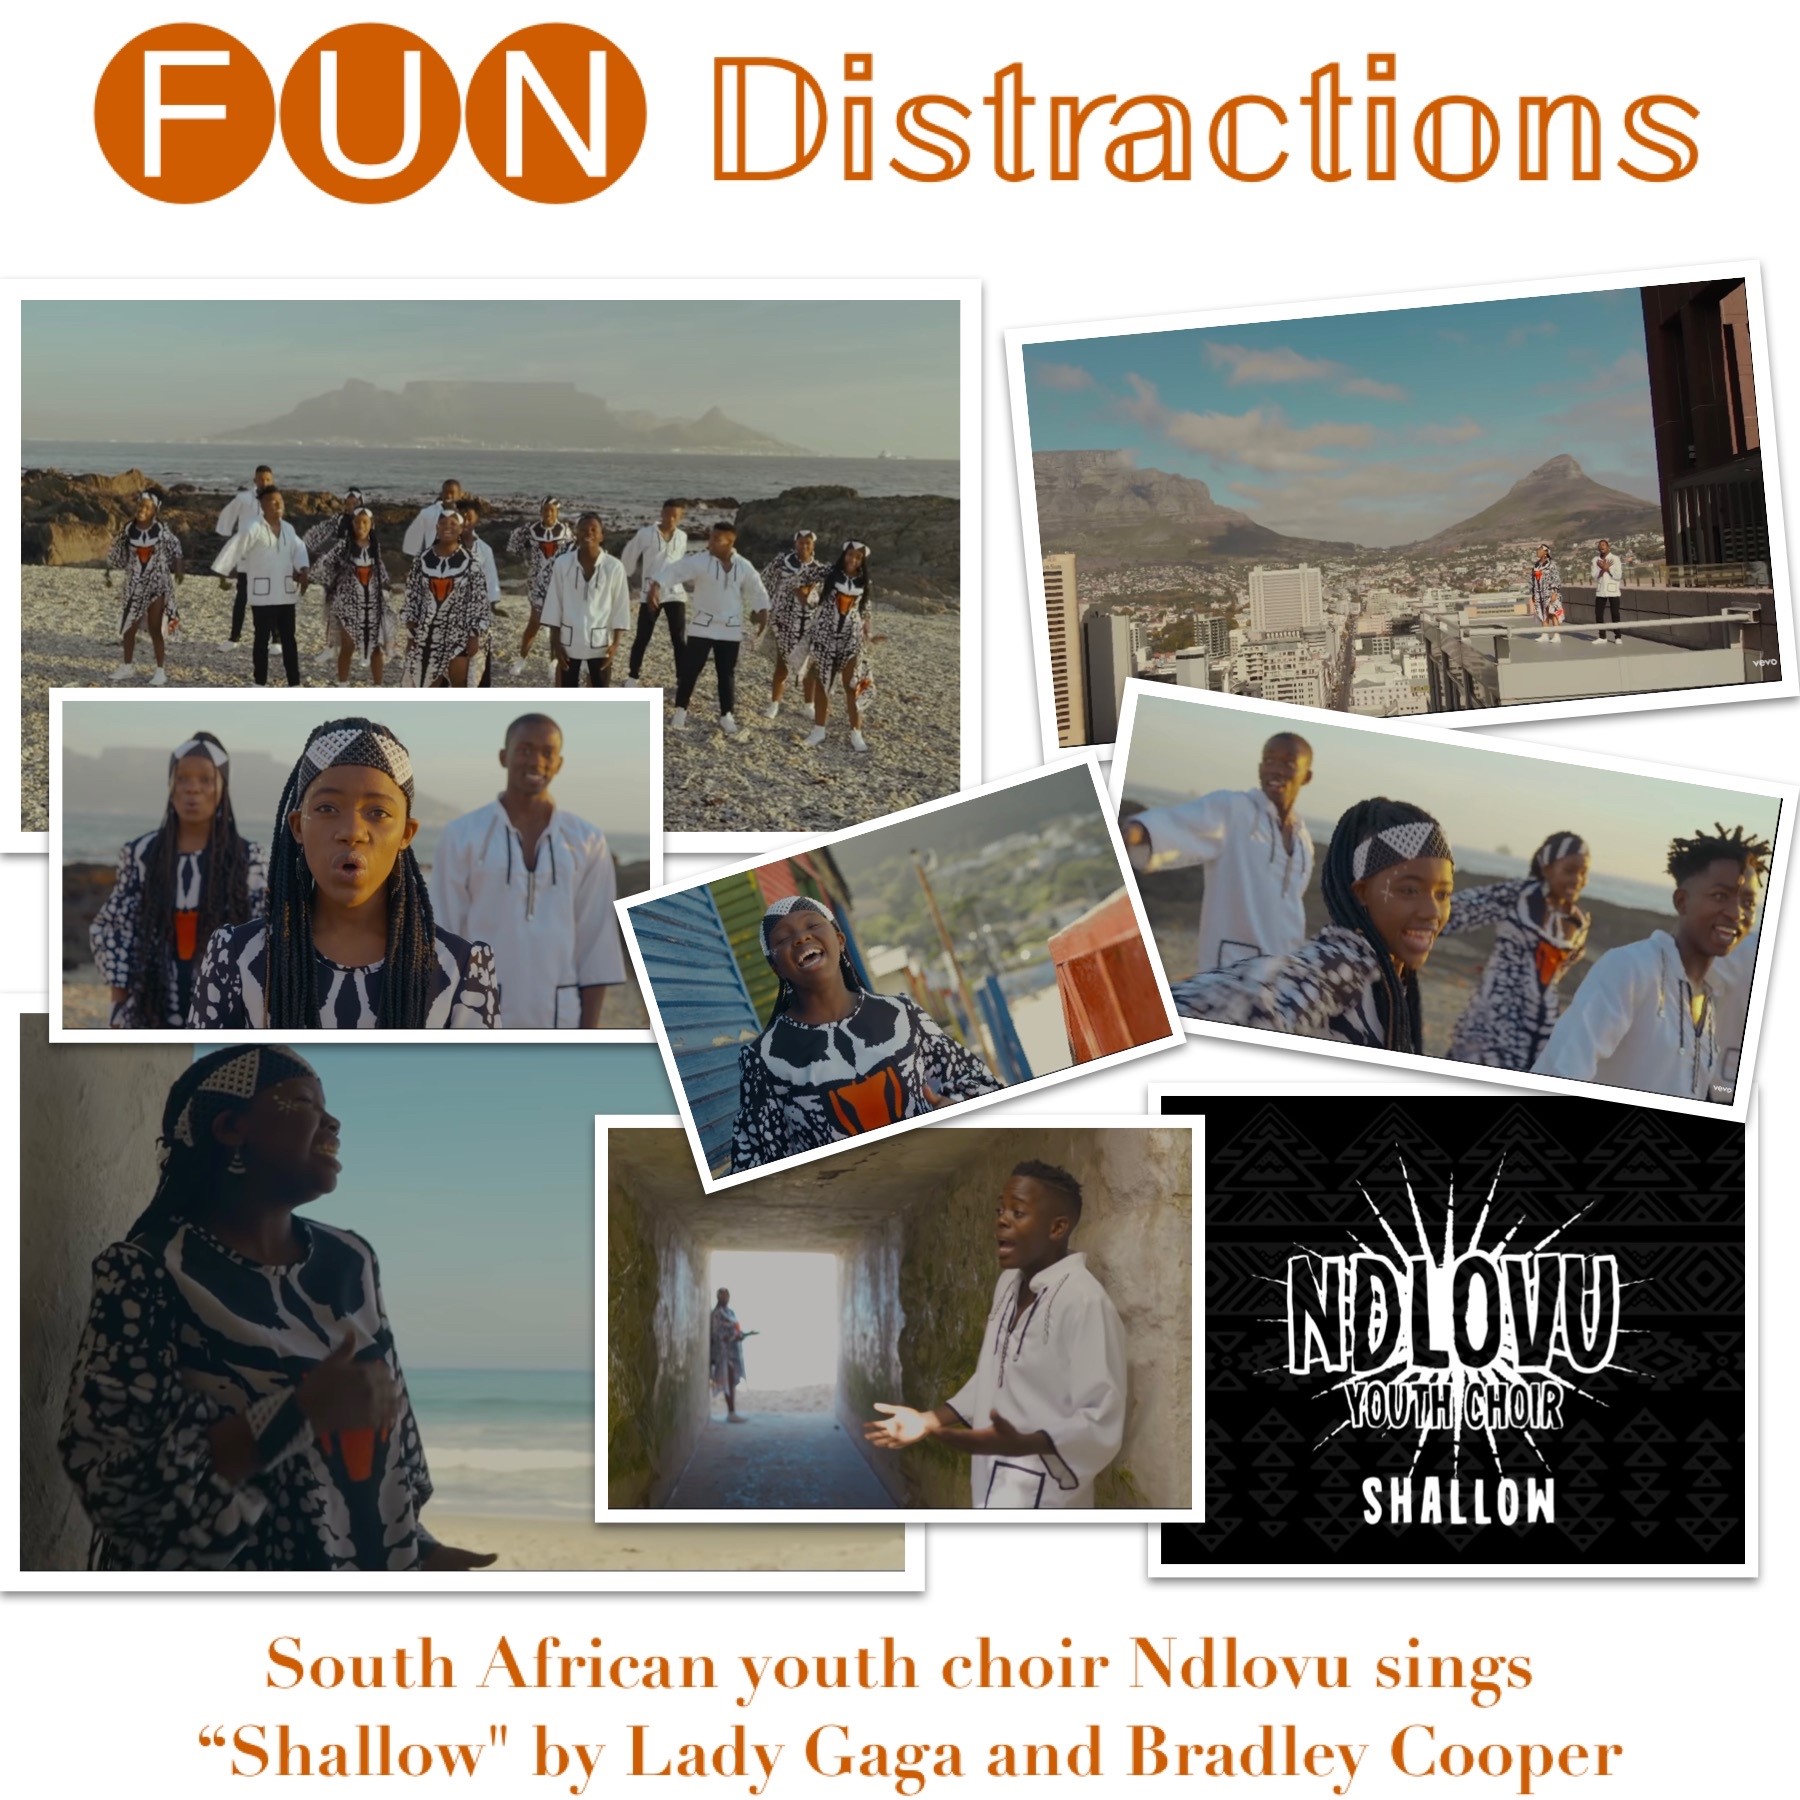 Image advertising the Library’s FUN Distractions series post about the Ndlovu Youth Choir